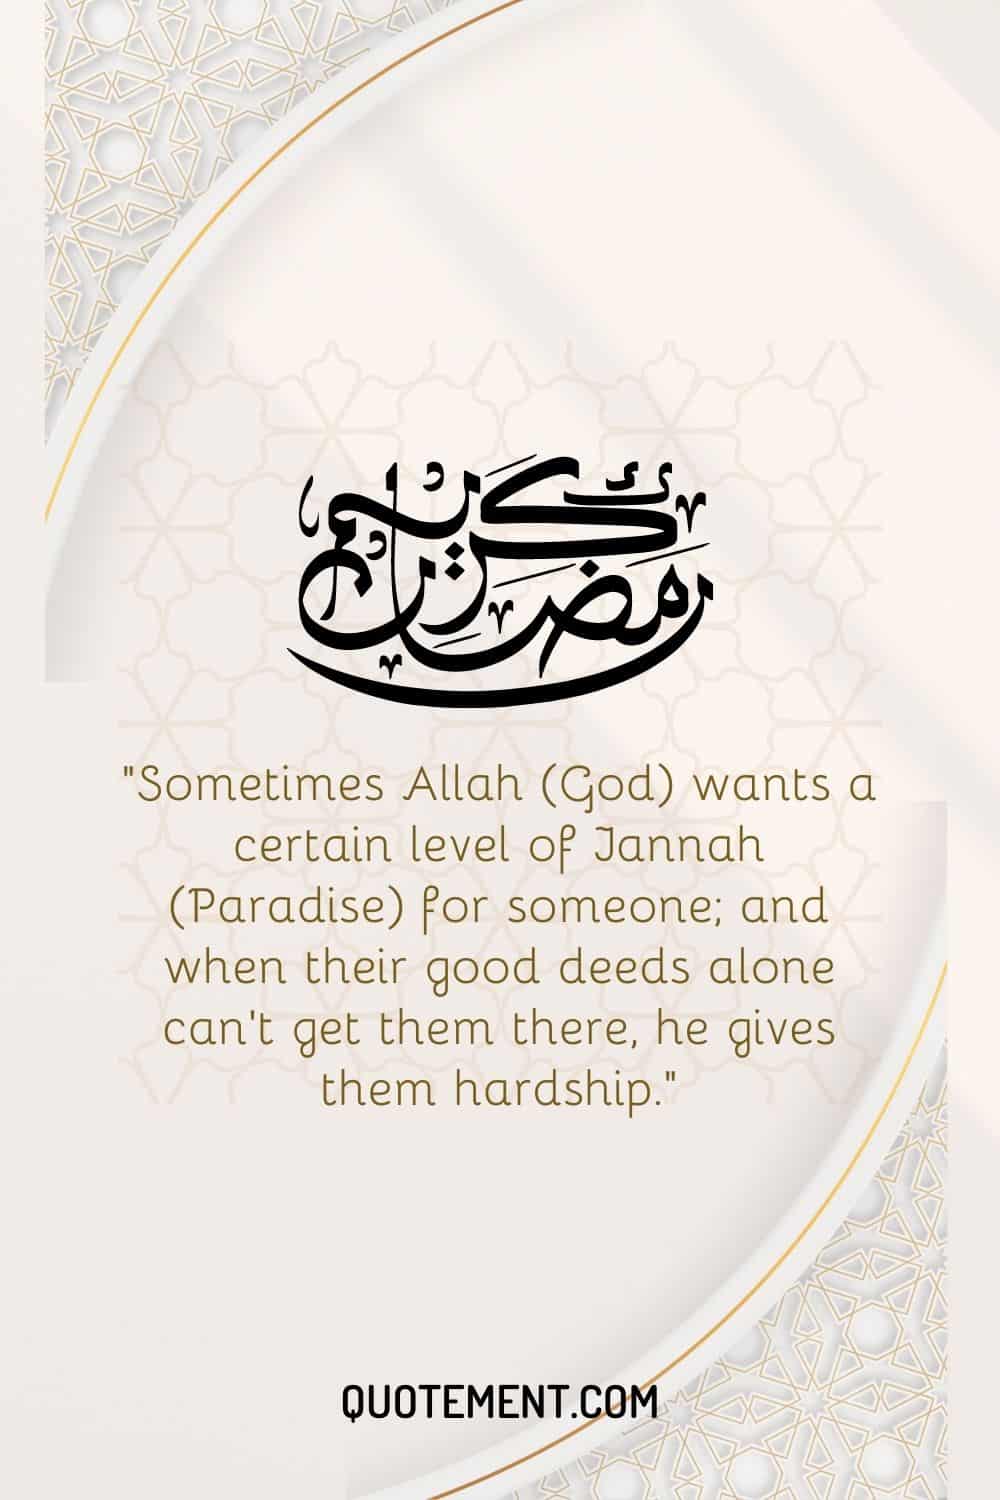 Sometimes Allah (God) wants a certain level of Jannah (Paradise) for someone